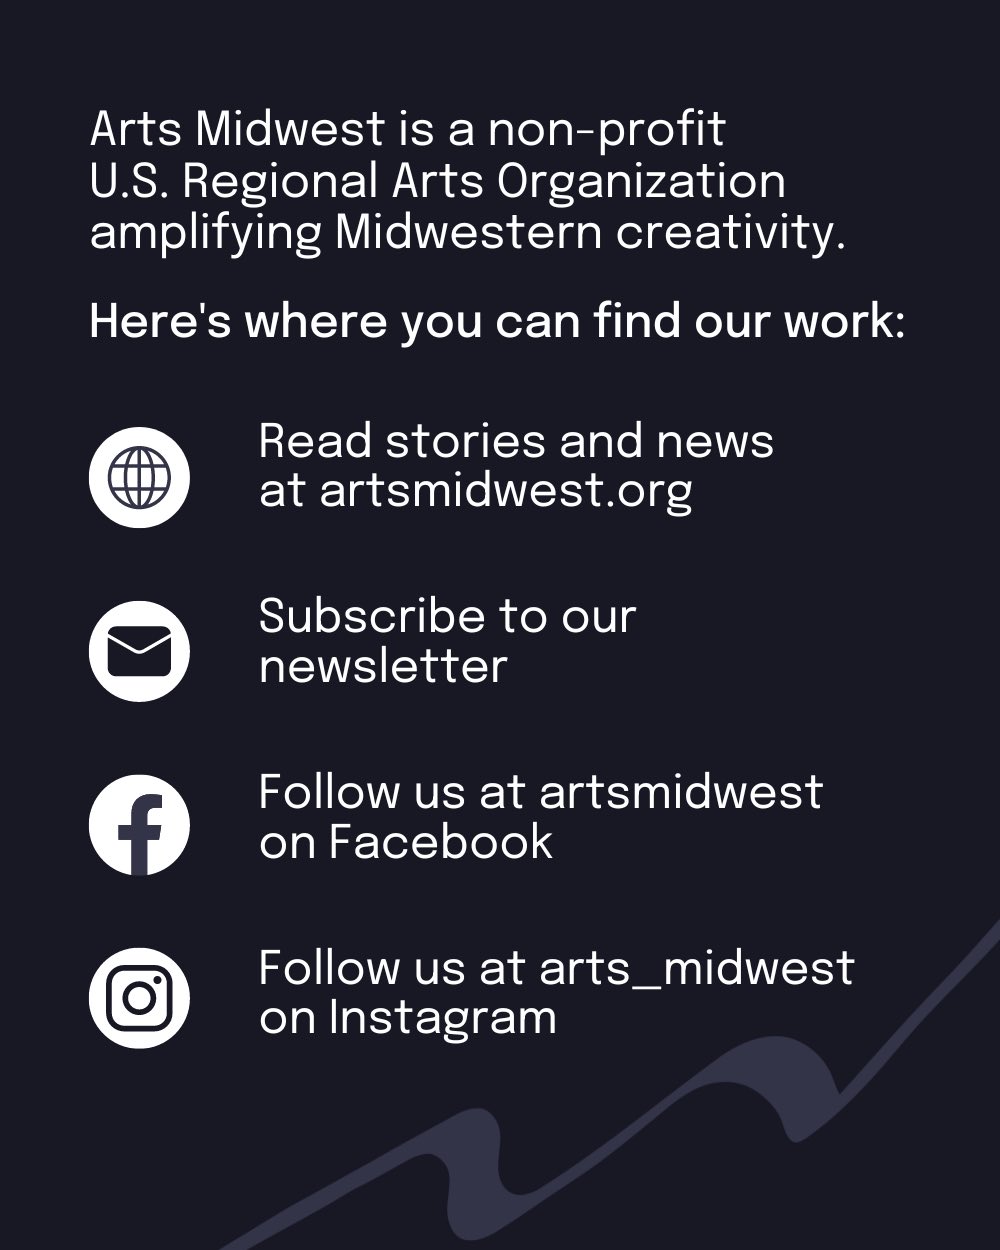 Amplifying Midwestern Creativity - Arts Midwest